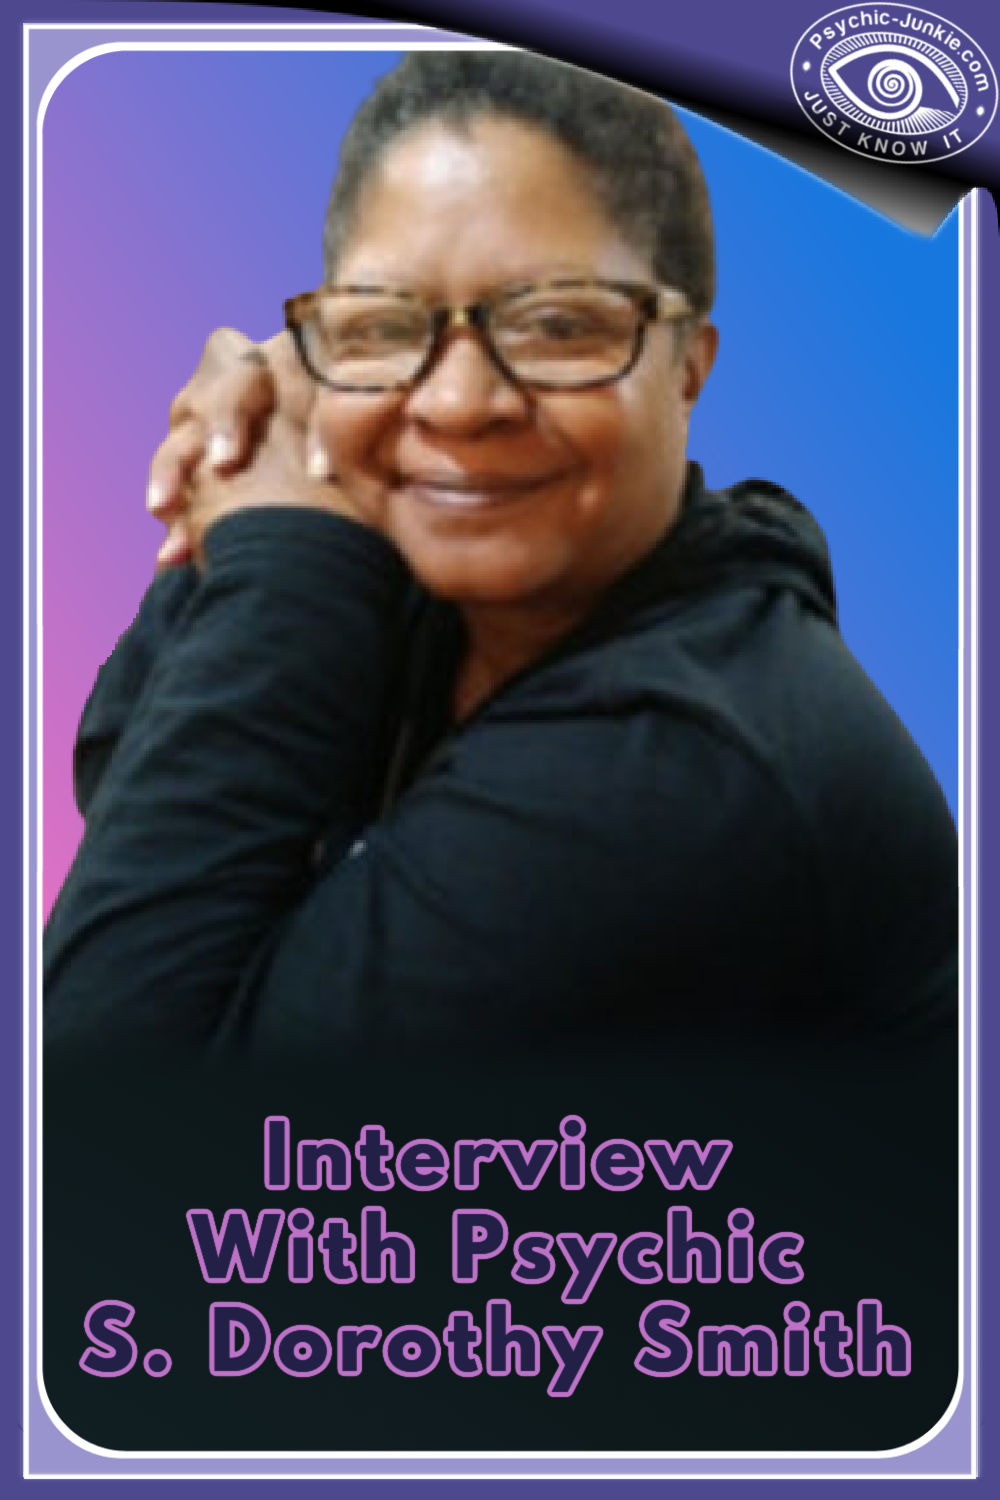 Interview With Psychic S. Dorothy Smith